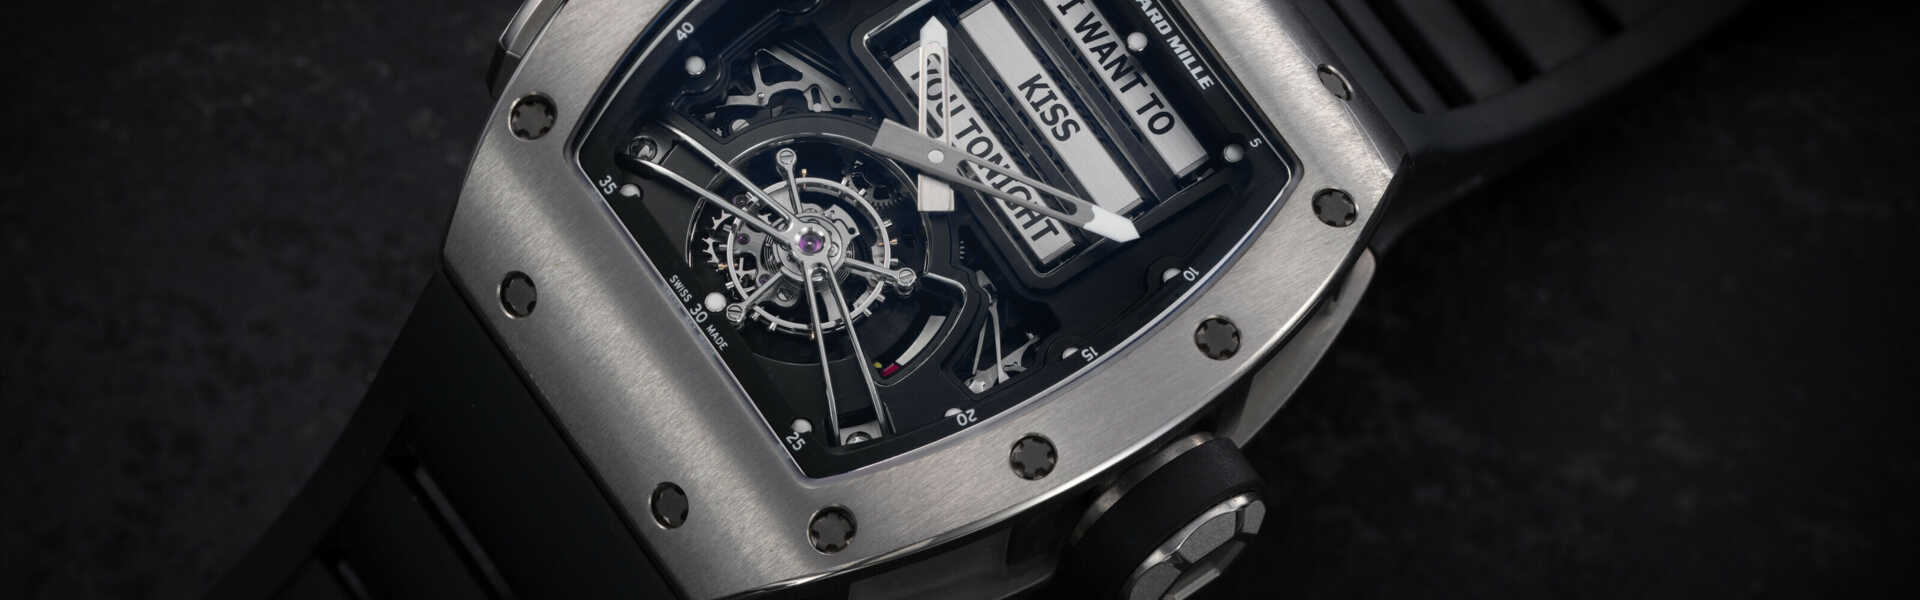 RICHARD MILLE, RM-69 EROTIC TOUBILLON, AN EXTREMELY RARE LIMITED EDITION TITANIUM WRISTWATCH